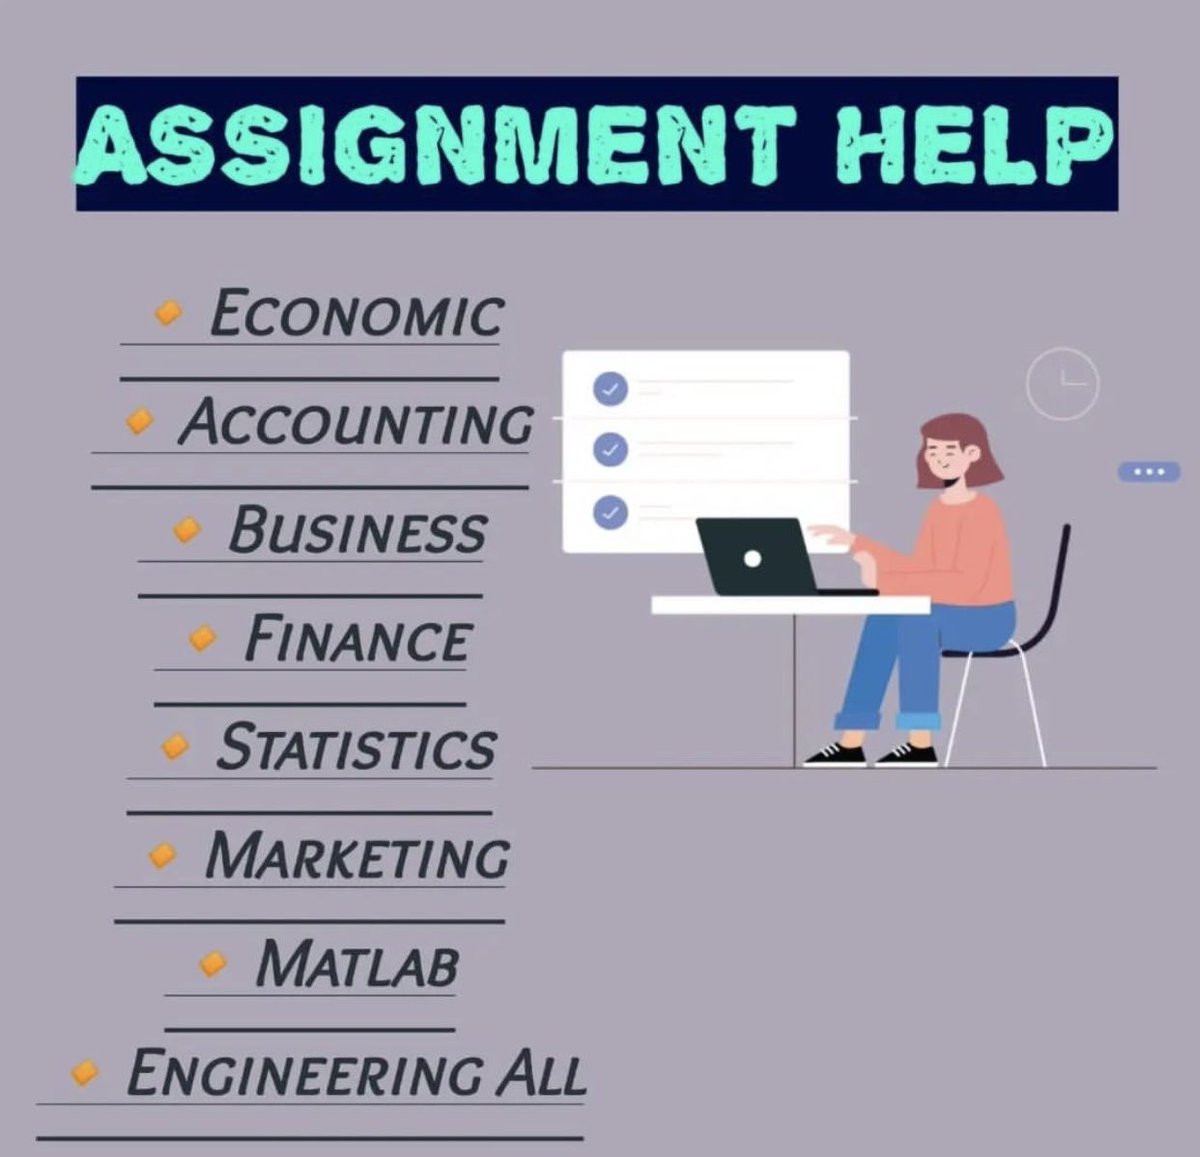 Let us help you attain the GPA you need to graduate. HMU
#Termpapers
#Finalexams
#Quizzes
#Essay
#Essaypay
#Reflective
#payessay
#payassignment
#payhomework
#paysomeonetowrite
#Payphilosophy
#payPsychology
#payEnglish
#paydissertation
#paypaperdue 

Textnow +1 (424)461-5270